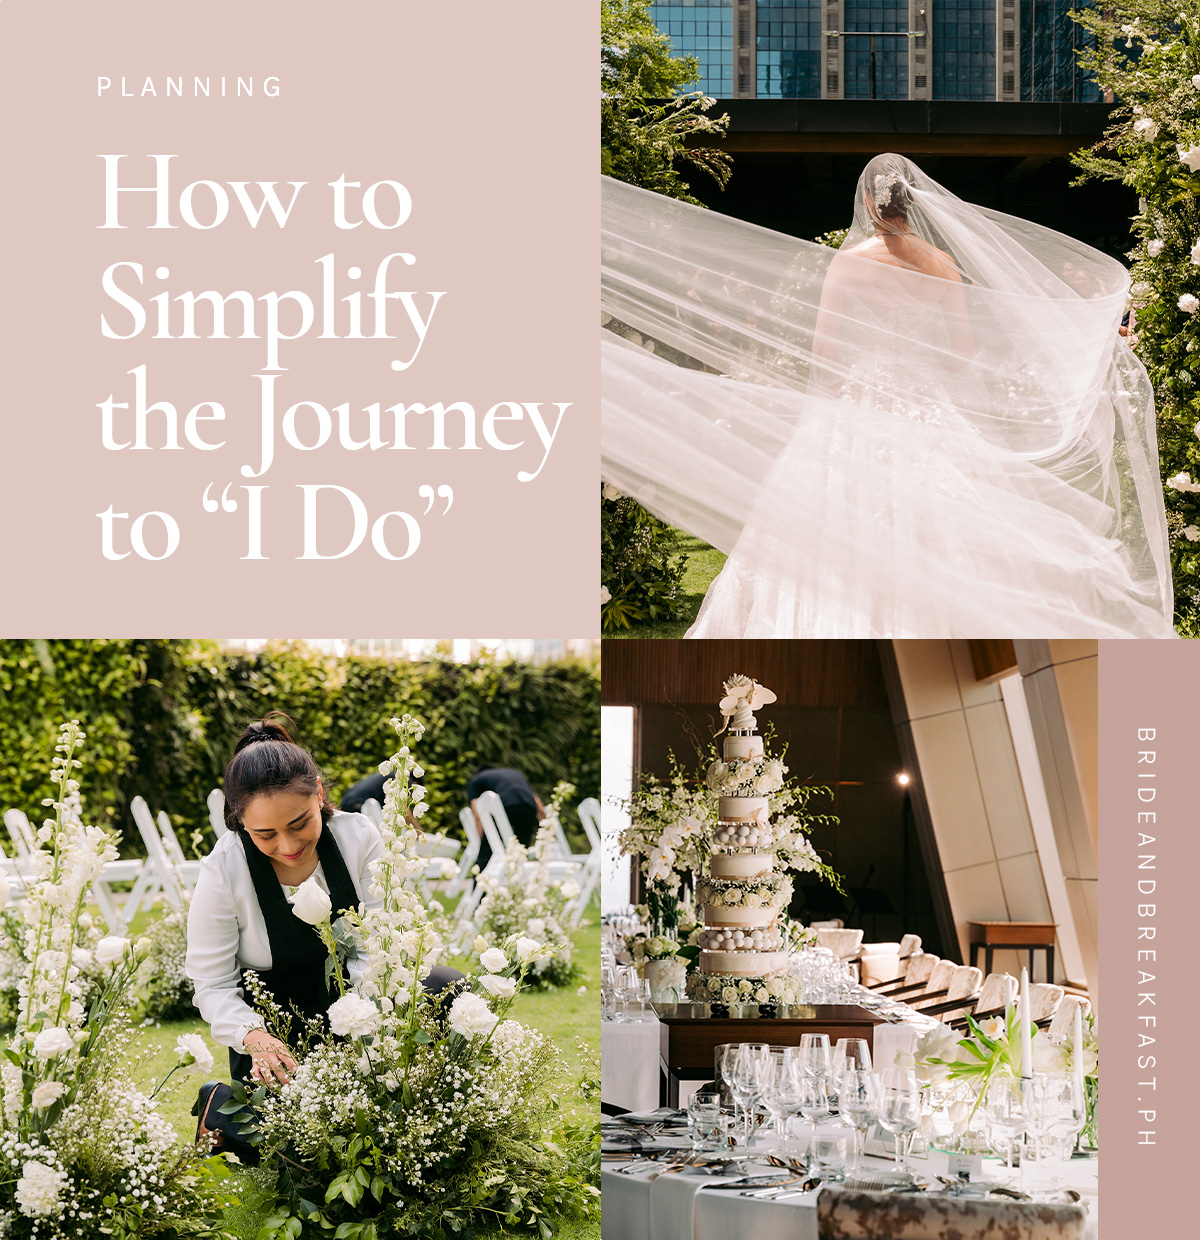 How to Simplify the Journey to I Do